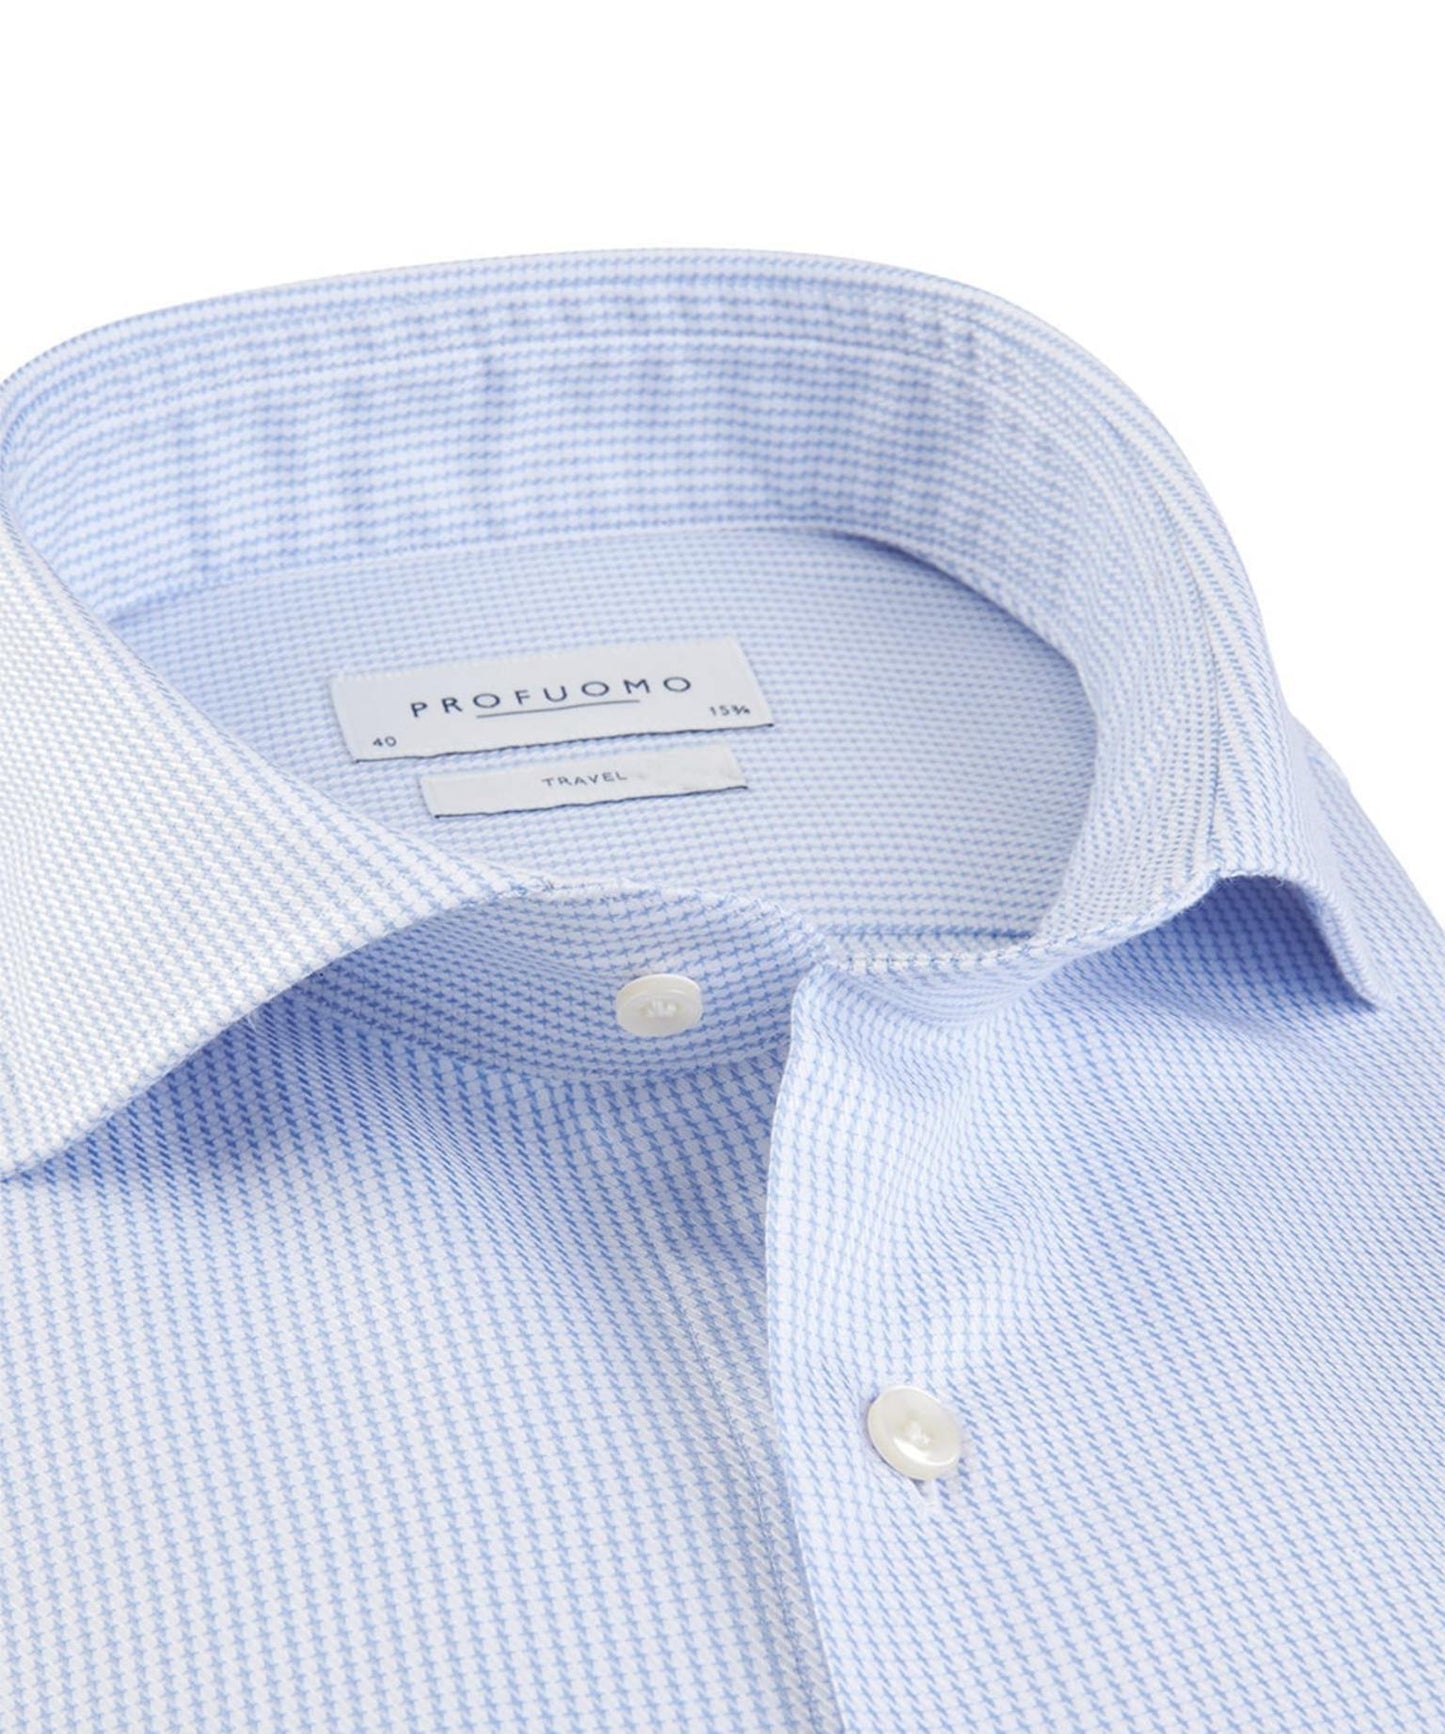 Light blue structured cotton slim fit shirt Profuomo - PPUH10021A